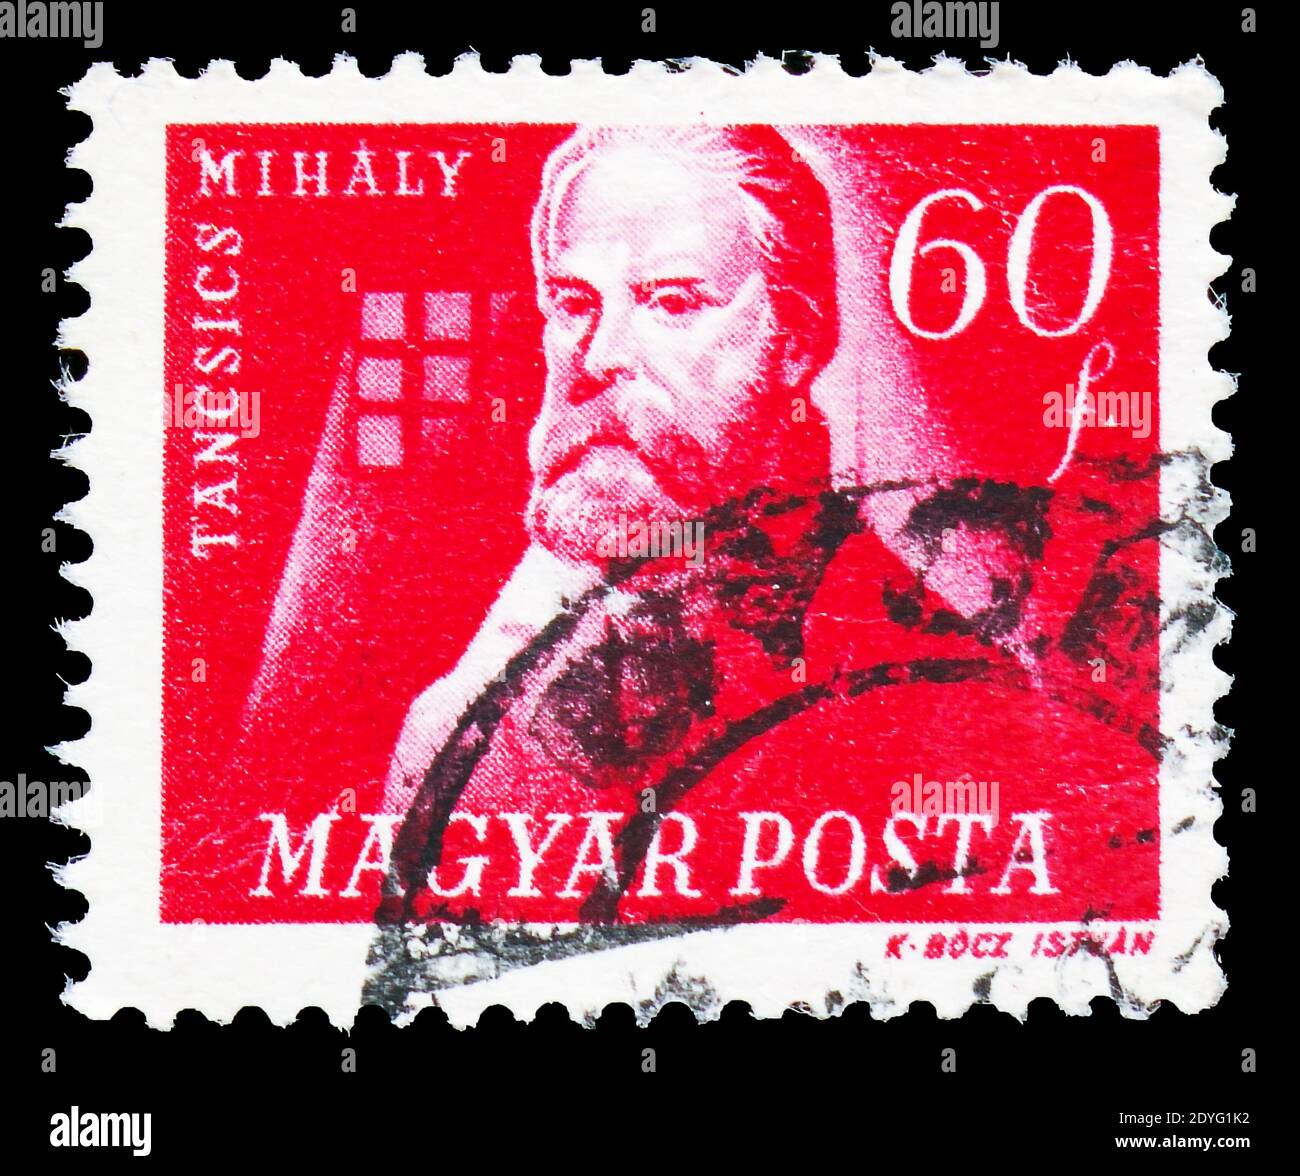 MOSCOW, RUSSIA - JULY 19, 2019: Postage stamp printed in Hungary shows Mihaly Tancsics (1799-1884) writer, Hungarian Freedom Fighters serie, circa 194 Stock Photo